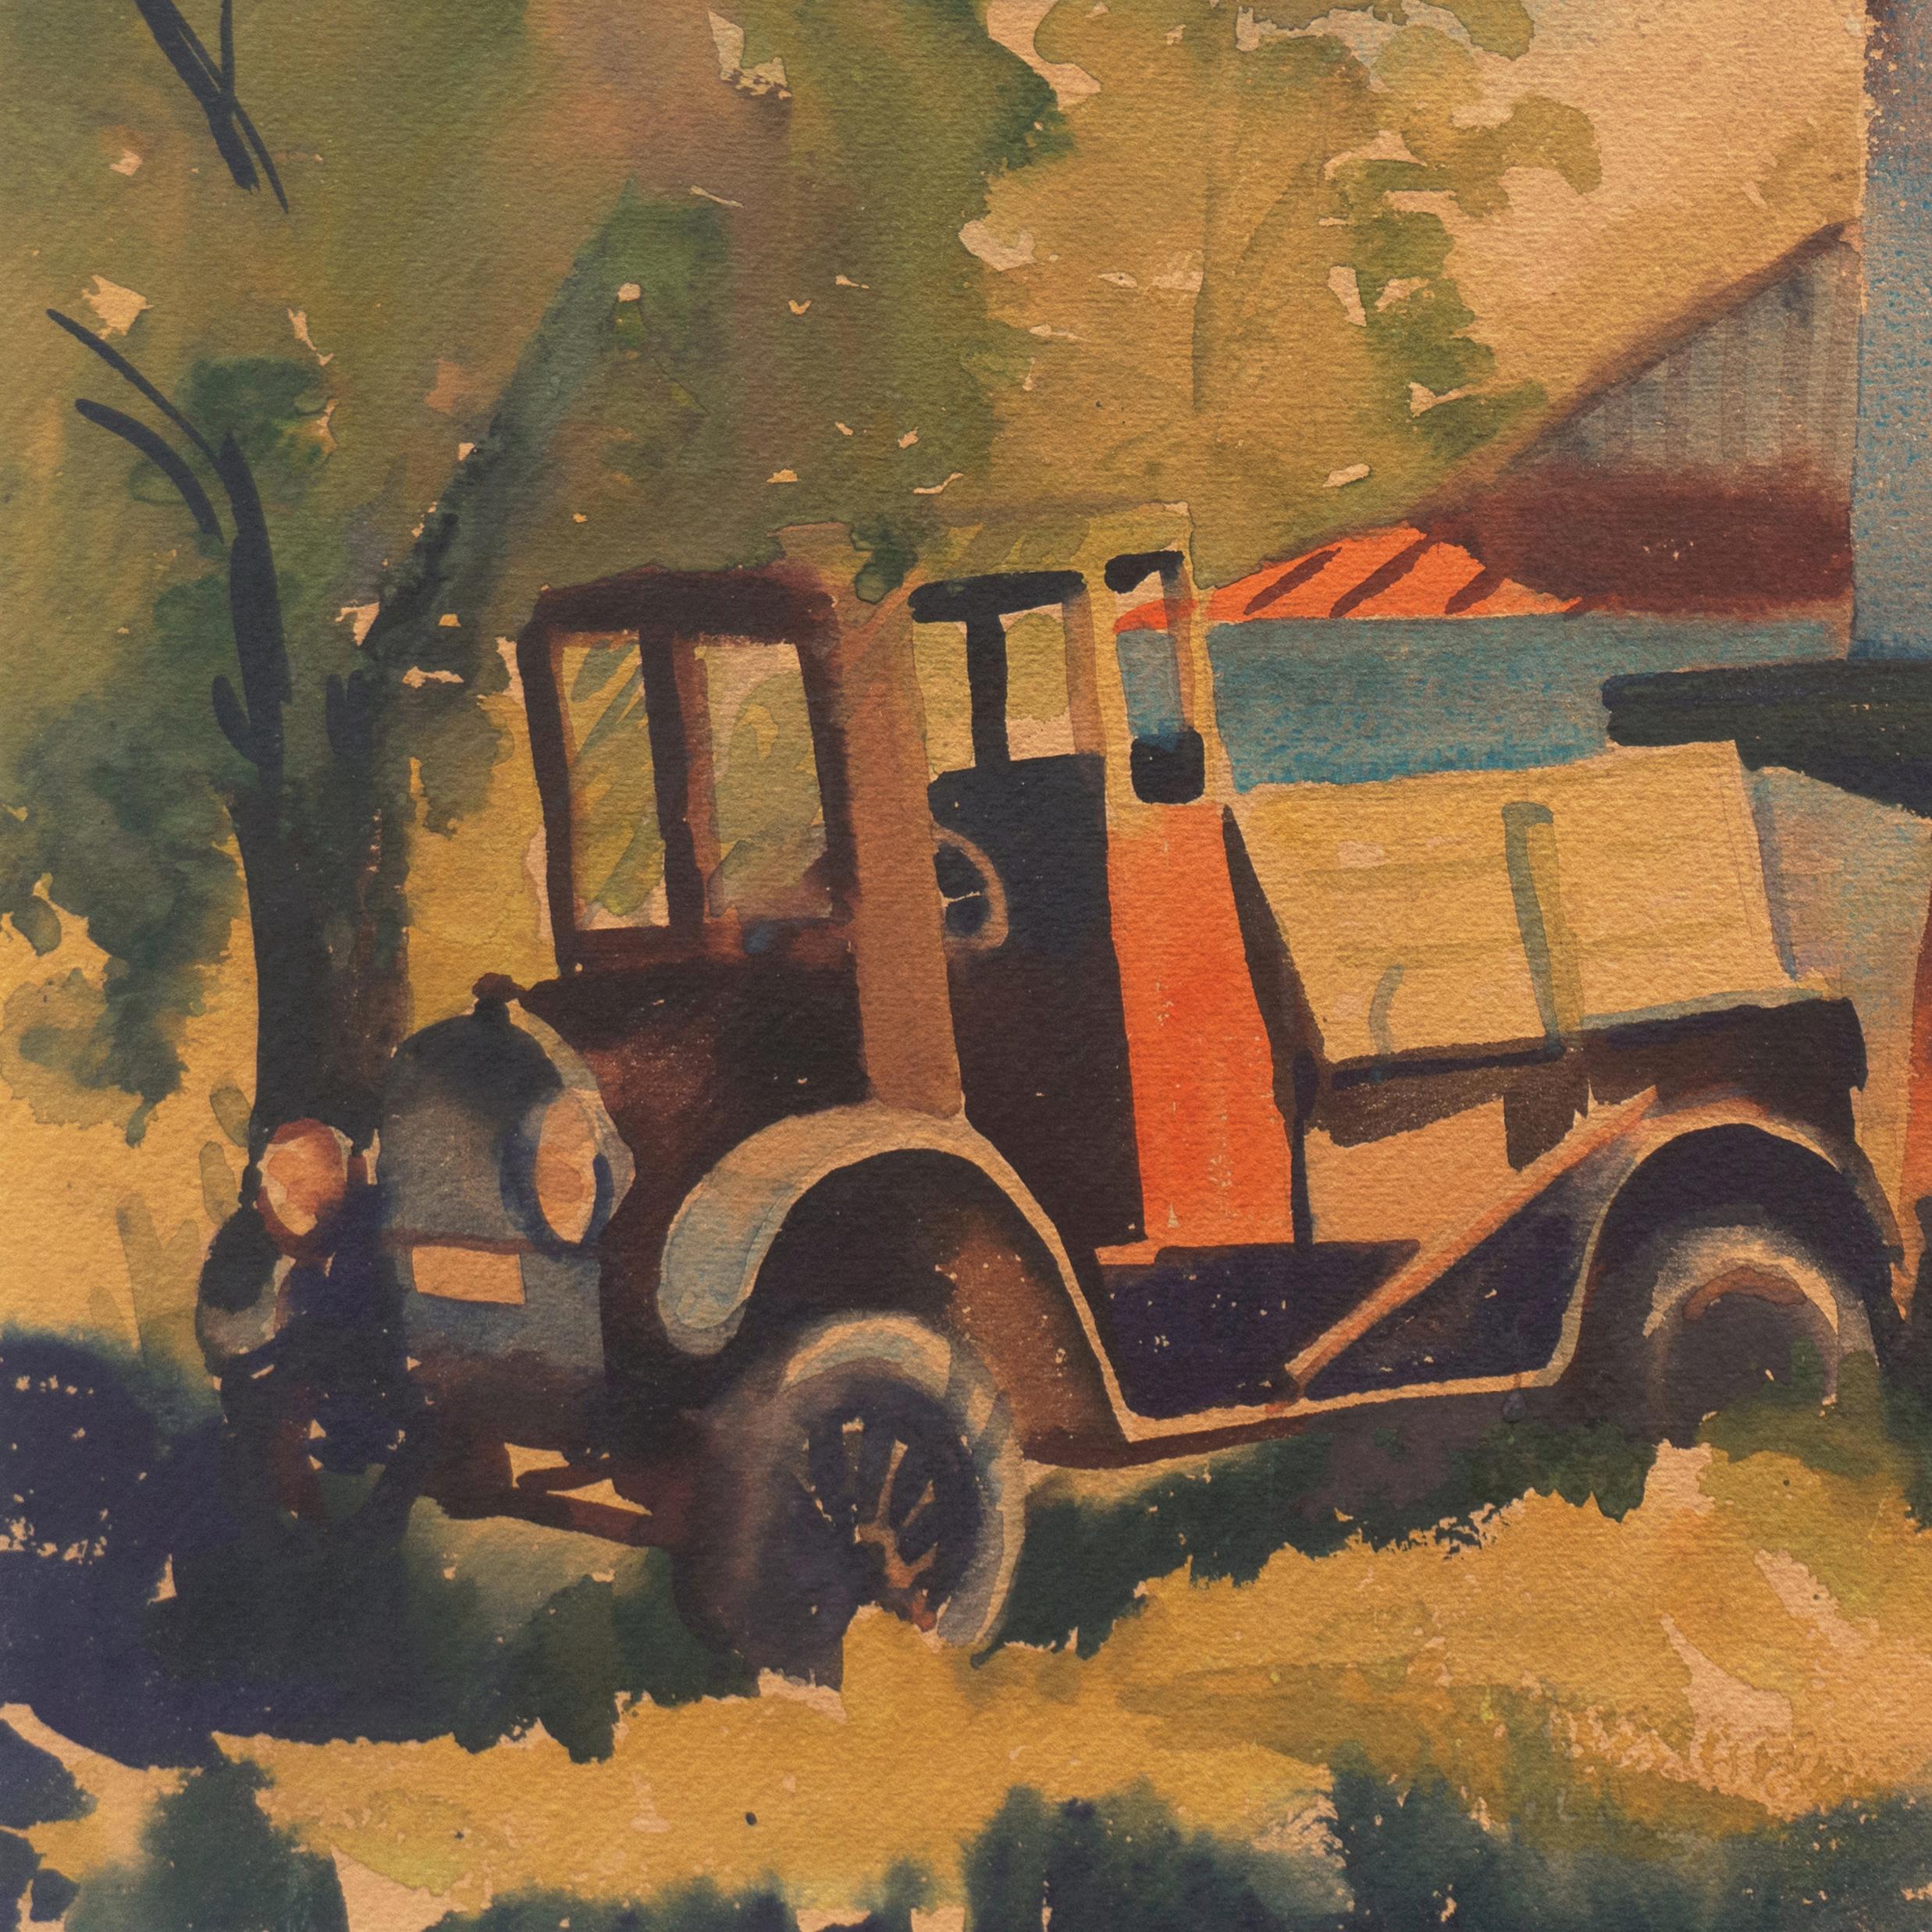 'Old Reliable', Early American Modernist, Jalopy, Model T Ford Flatbed Truck - Art by American School